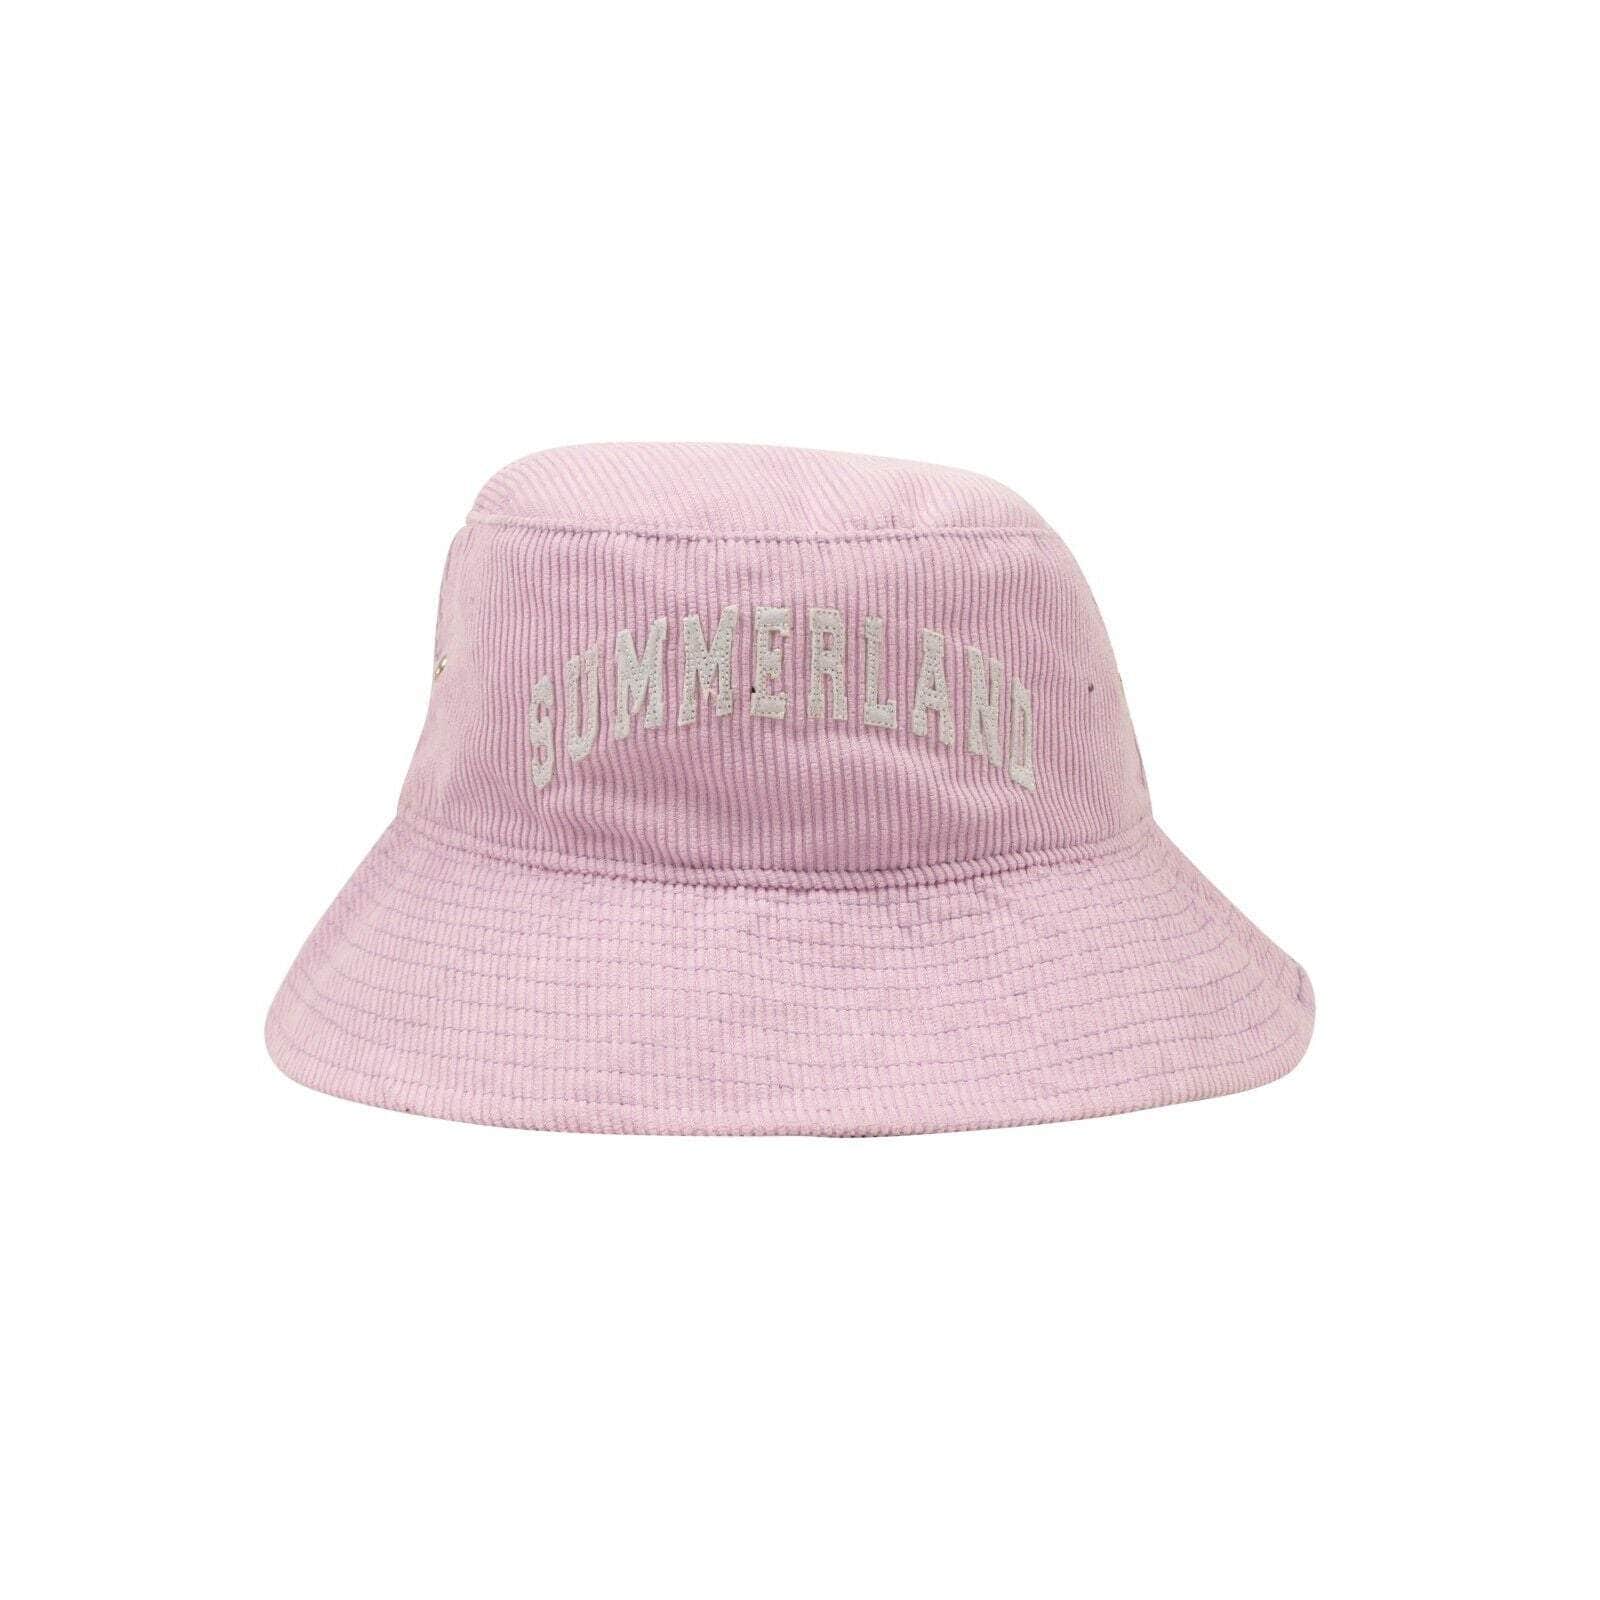 Nahmias channelenable-all, chicmi, couponcollection, gender-mens, main-accessories, mens-shoes, nahmias, size-os, under-250 OS Lavender Corduroy Summerland Bucket Hat NMS-XACC-0002/OS NMS-XACC-0002/OS